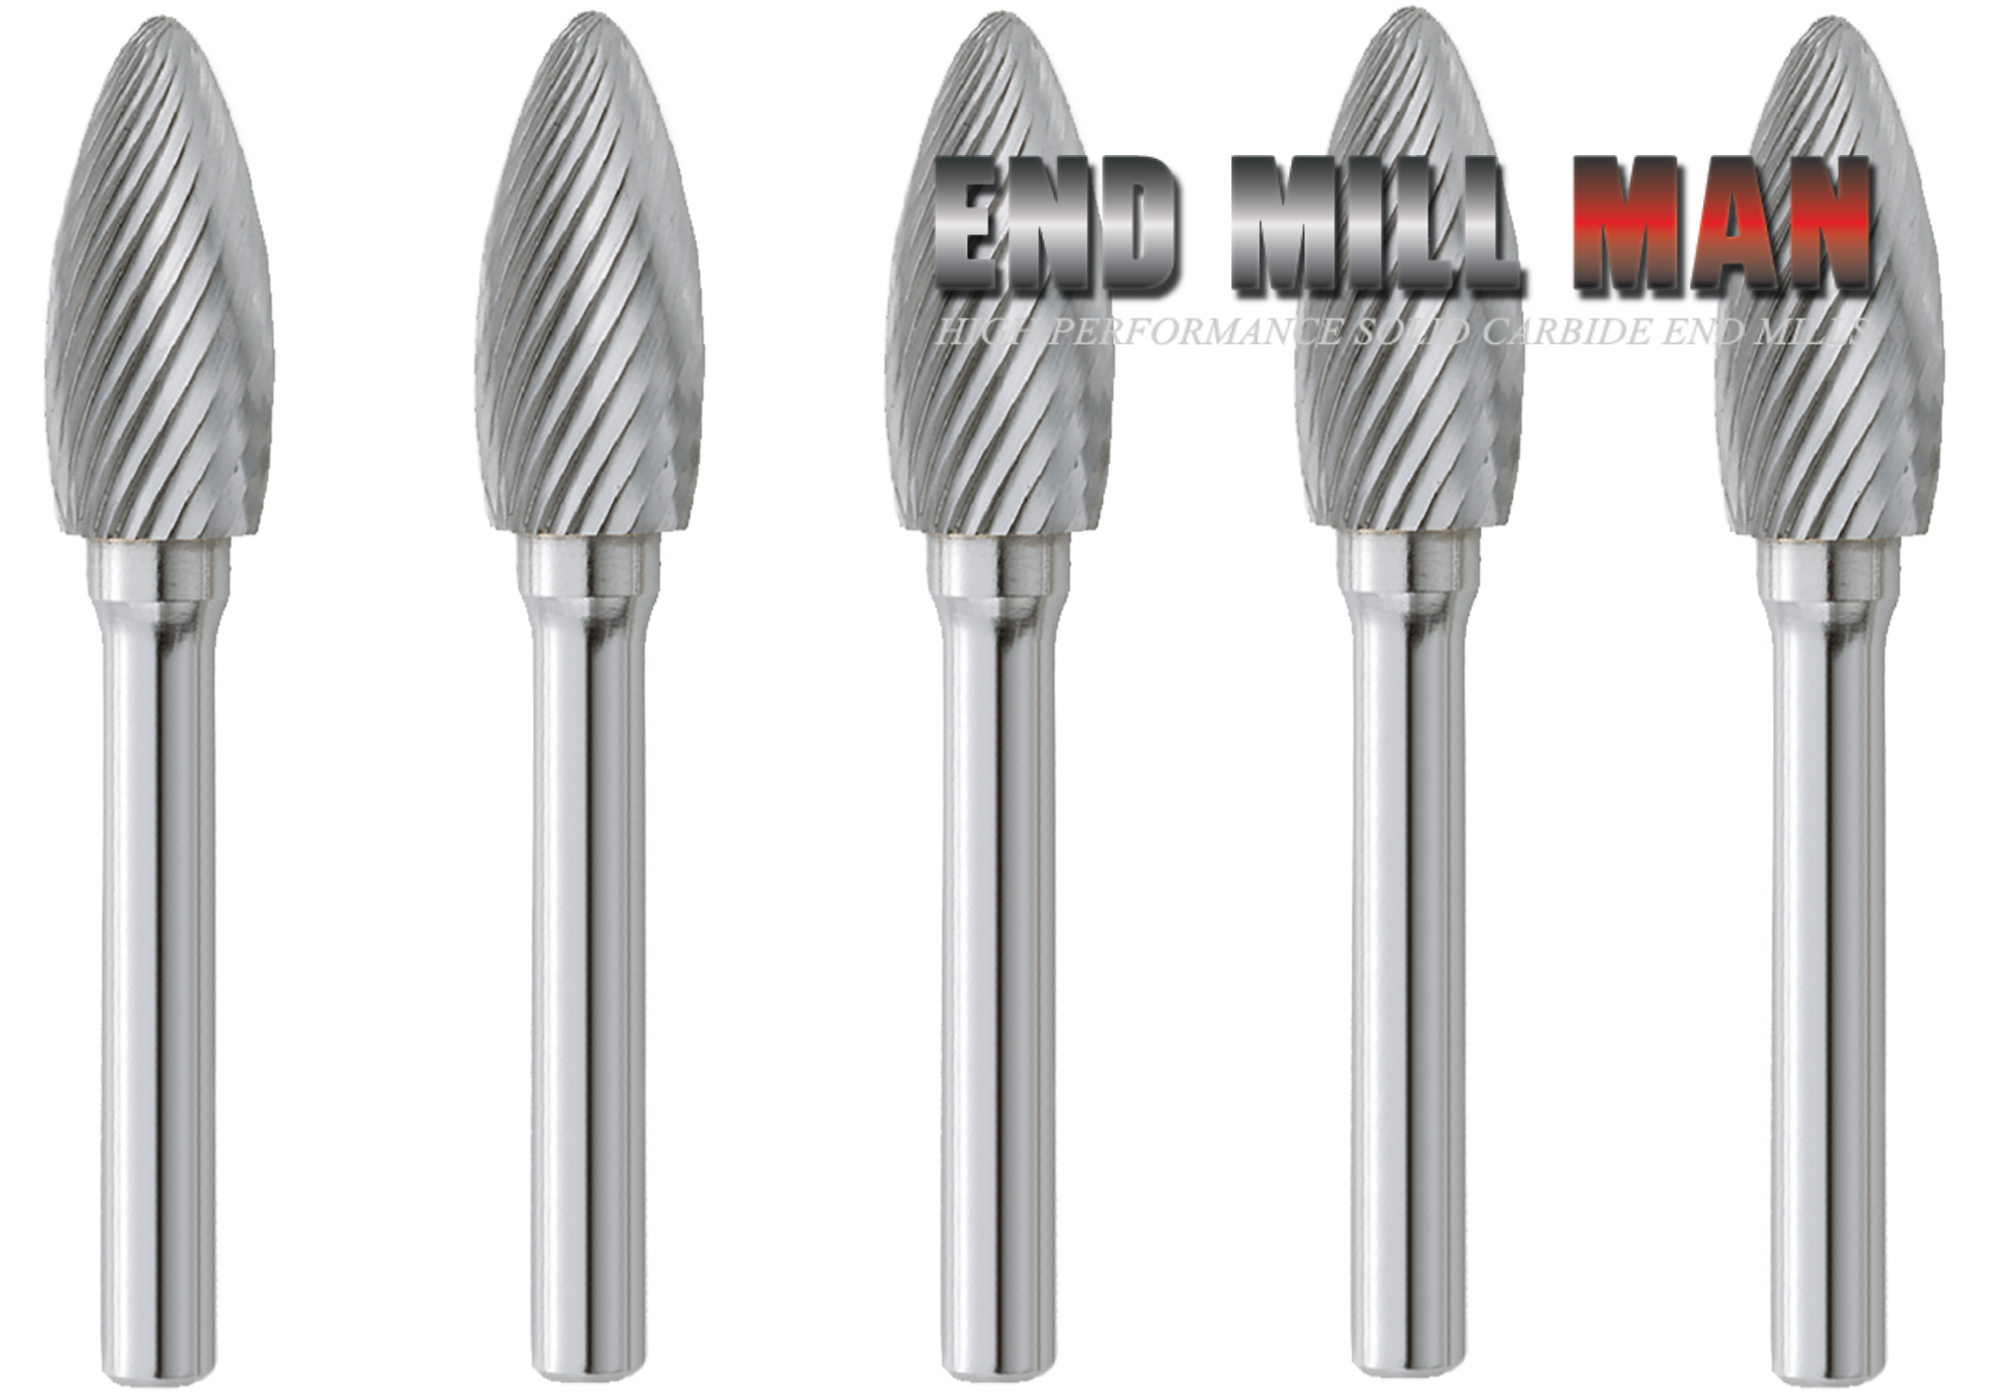 SH-5L6 Burr (5 Pack) 1/2" x 1-1/4" Cut Length x 6-1/2" OAL on 1/4" Shanks - The End Mill Store 